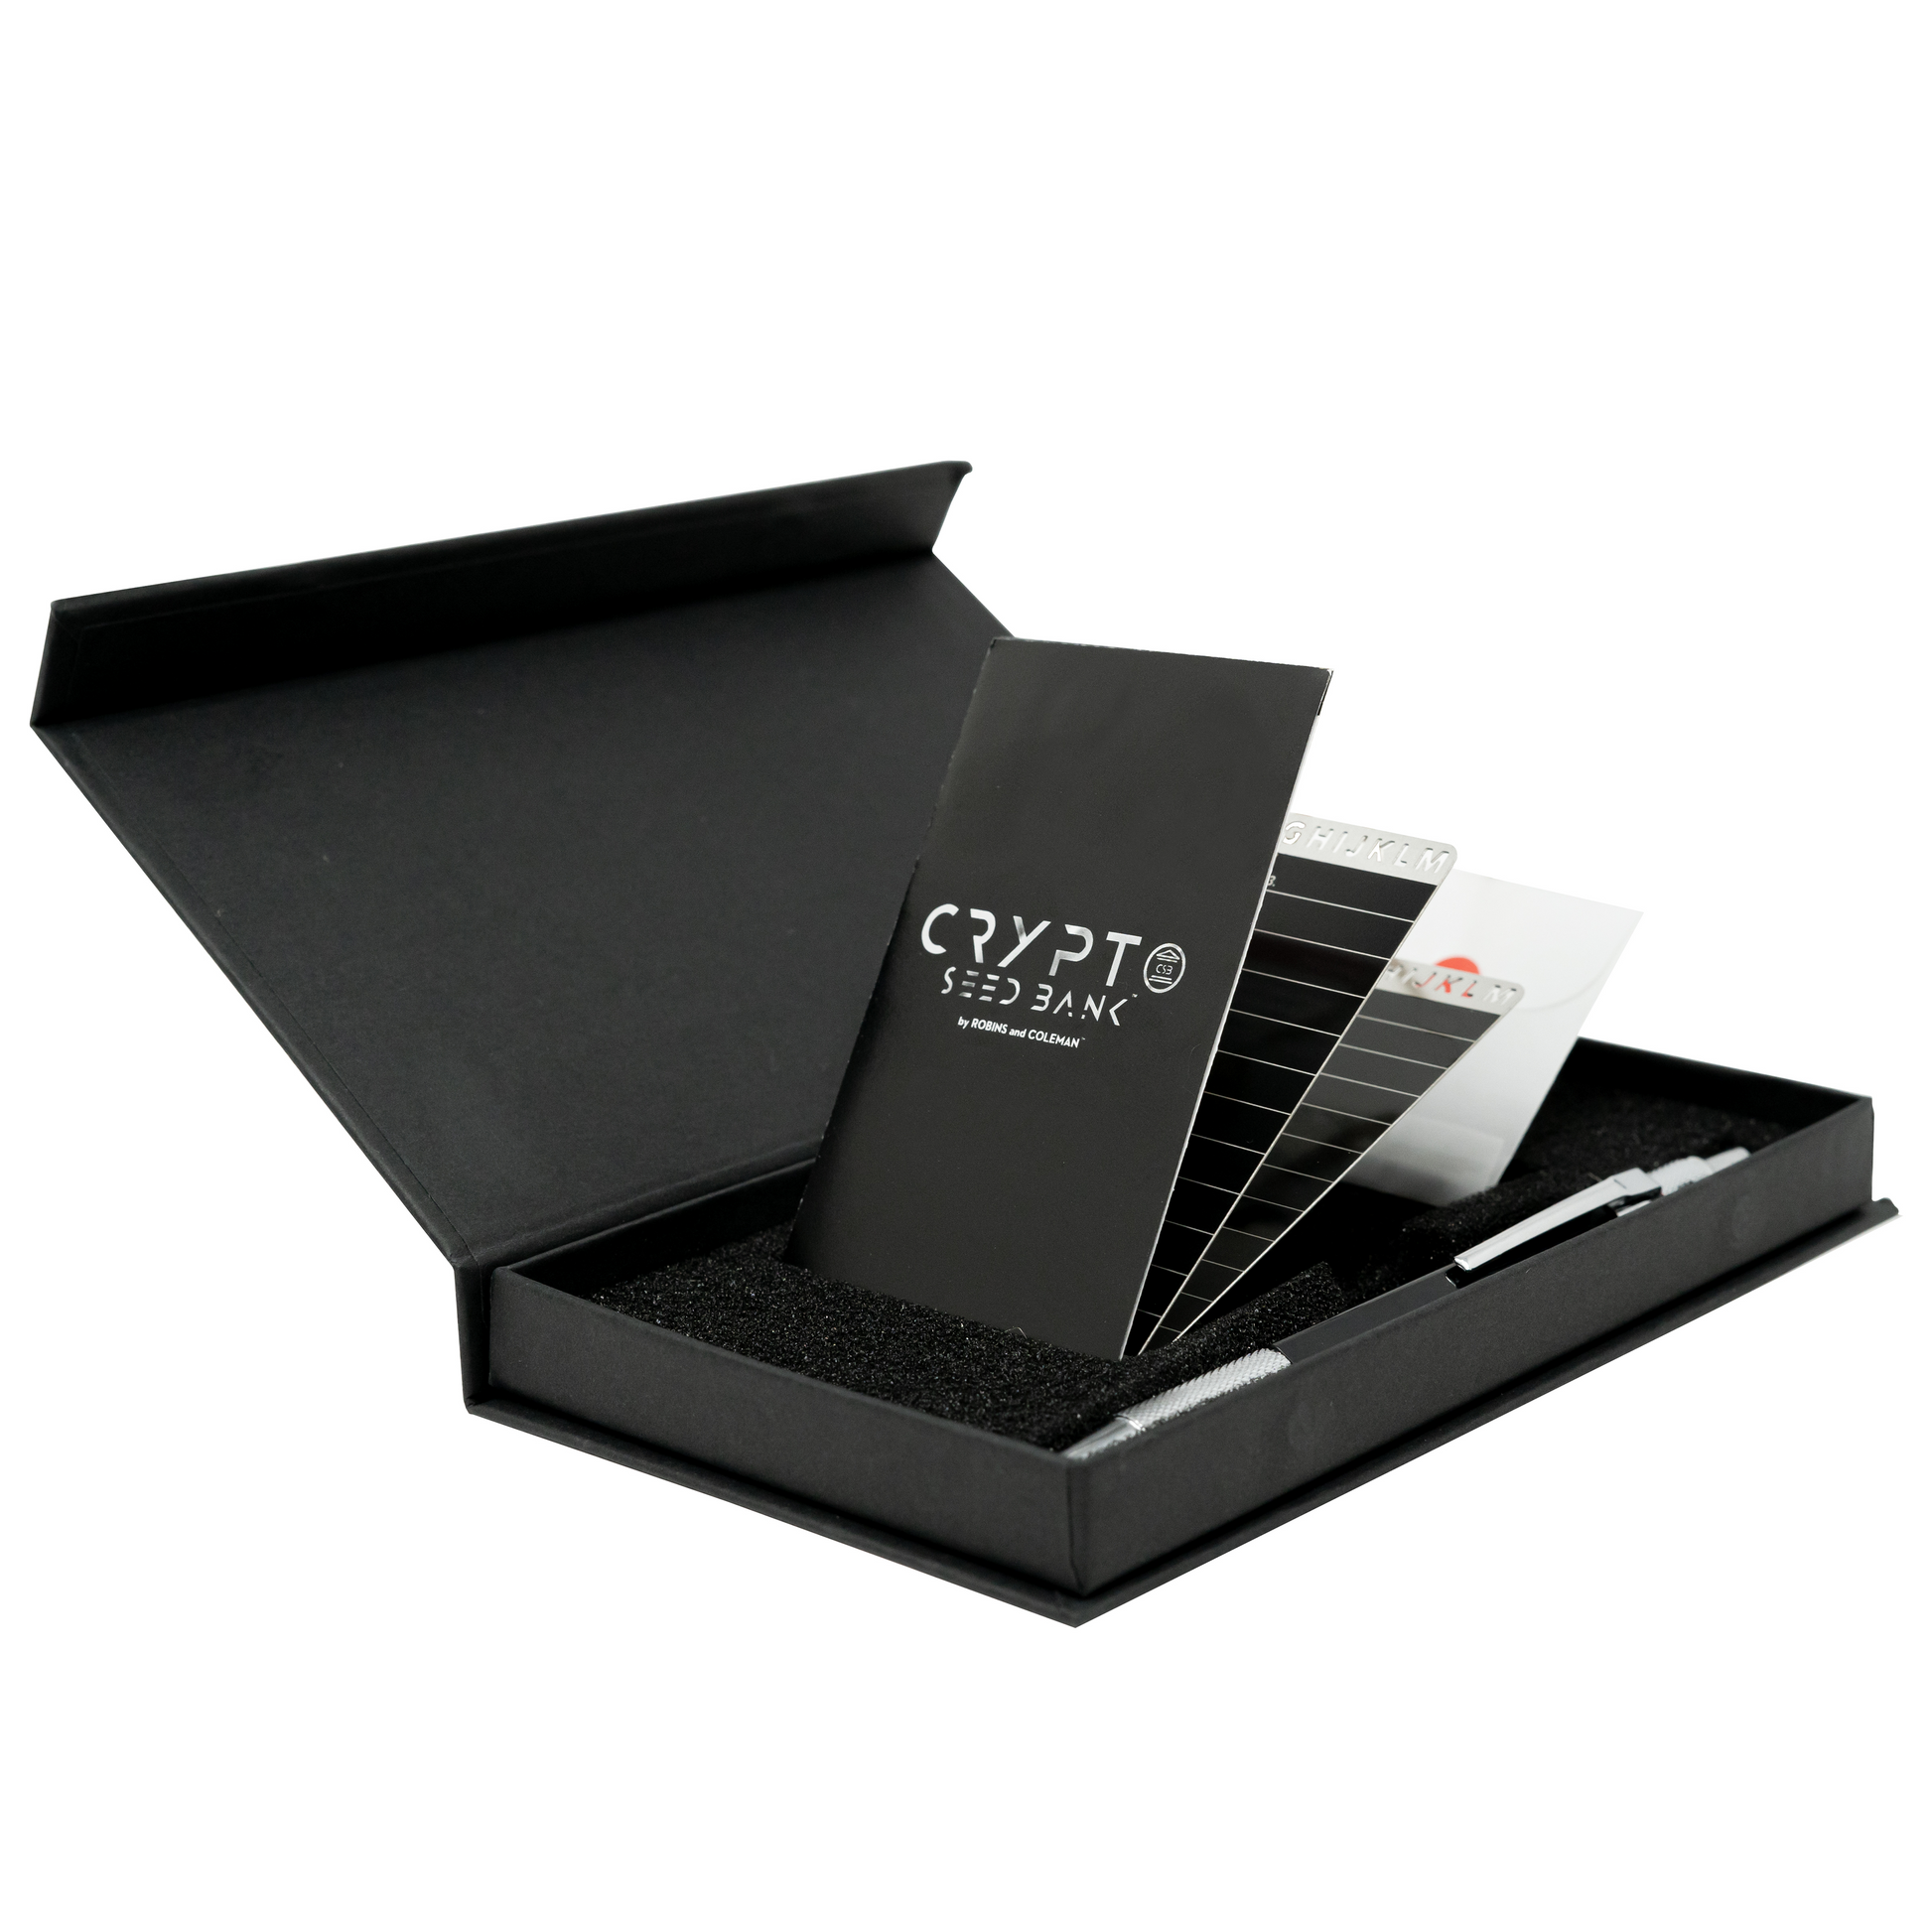 CRYO Crypto Seed Storage - Crypto Stainless Steel Wallet - Recovery Seed  Phrase Storage - Cold Storage Cryptocurrency Bitcoin Backup - Store up to  24